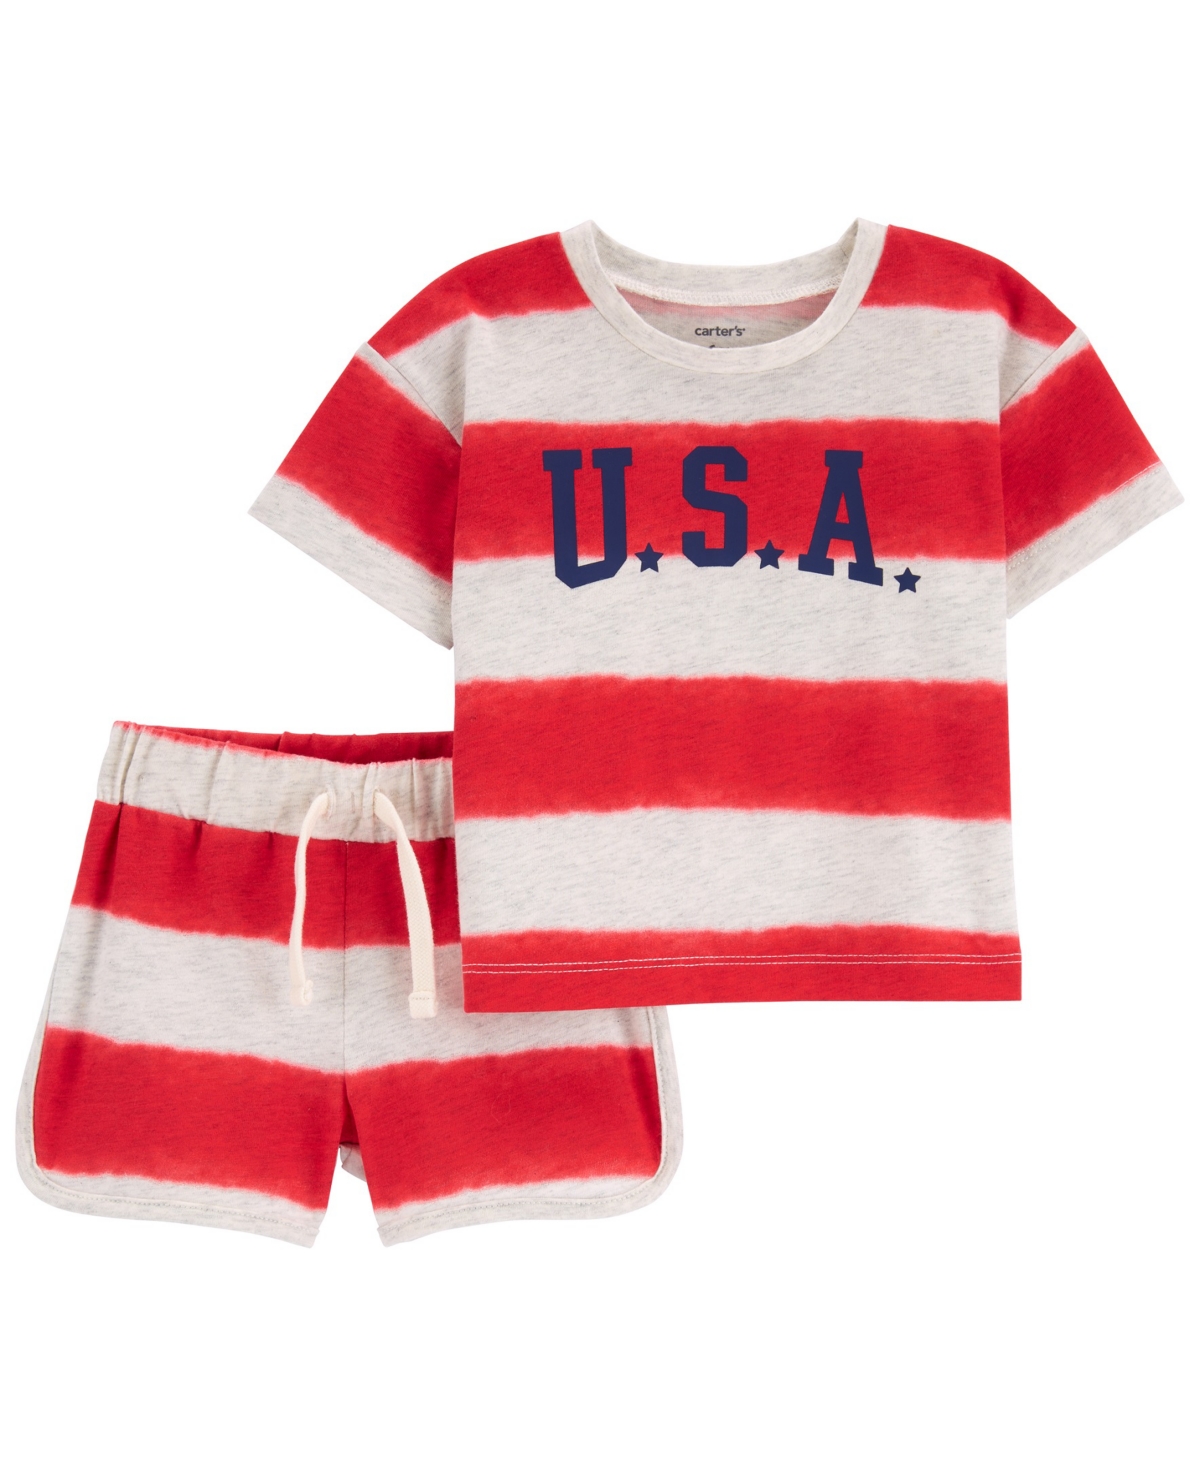 Carter's Baby Boys 2 Piece Usa Striped Outfit Set In Red